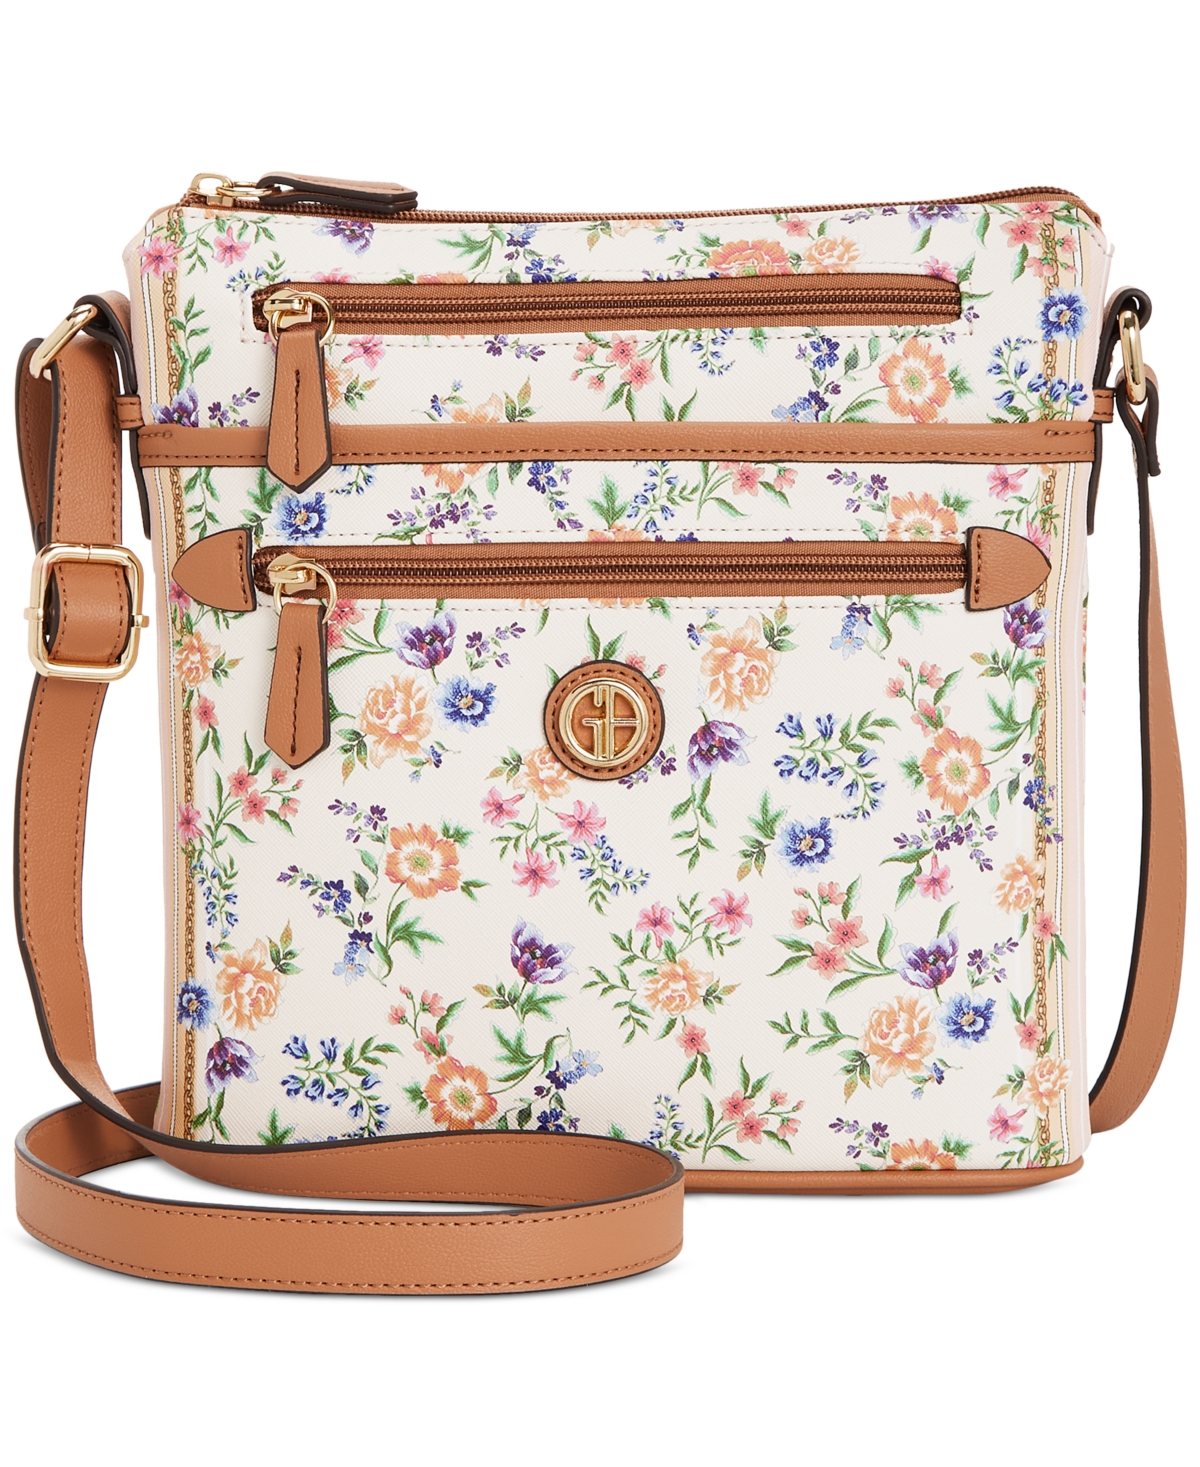 Saffiano Pastel Floral North South Small Crossbody, Created for Macy's - Floral Multi